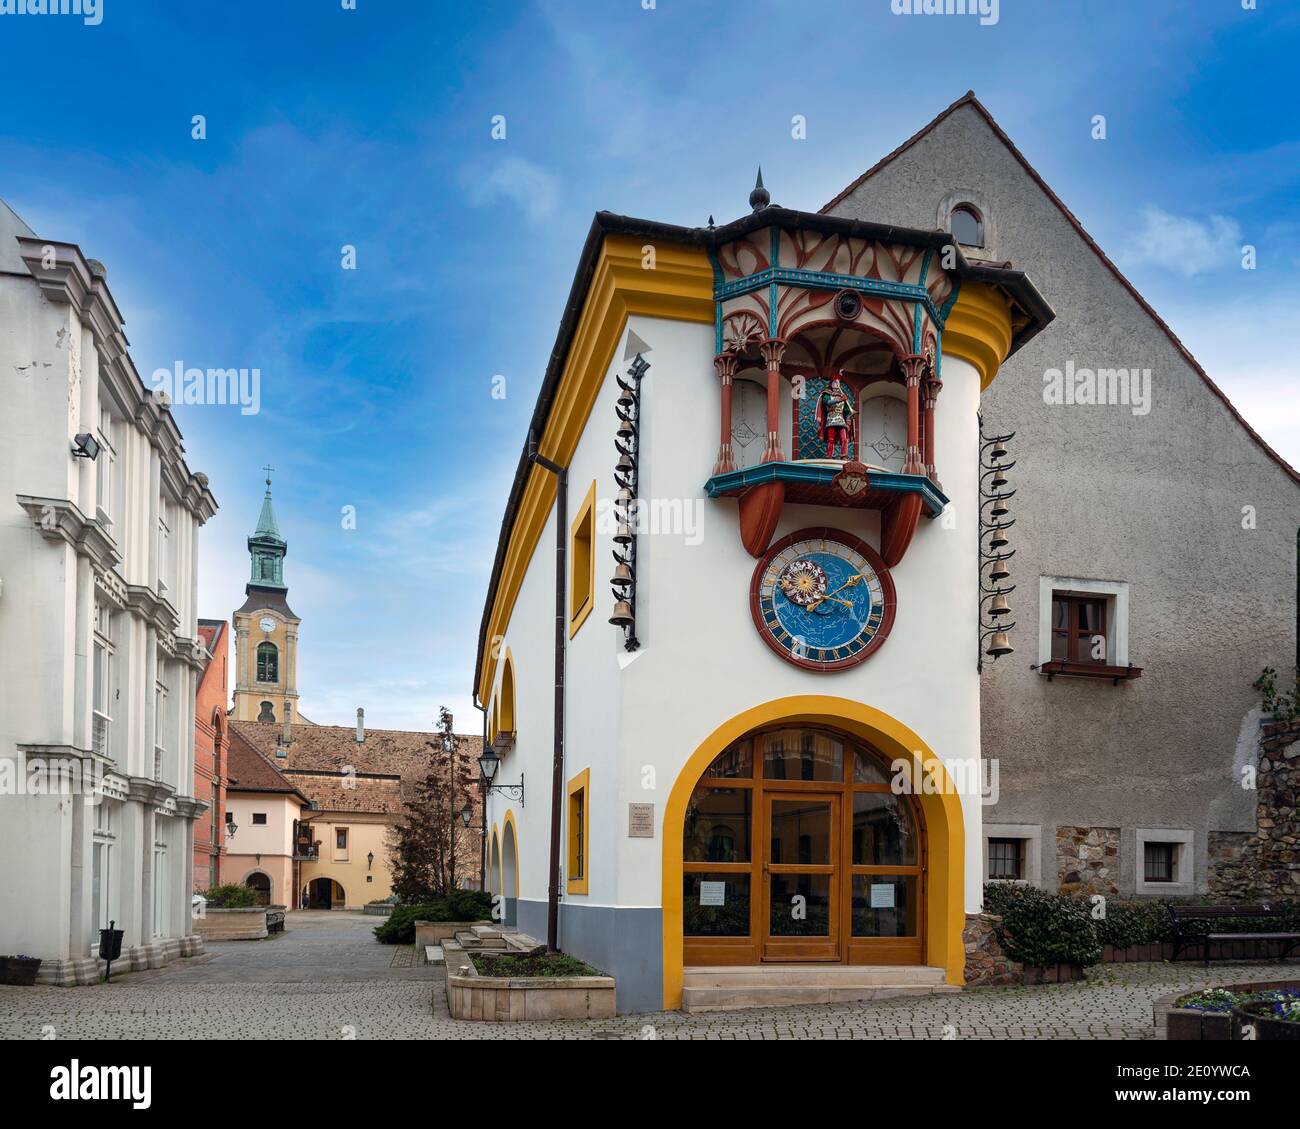 Colockworks and clock museum in Szekesfehervar Hungary. The characters of the clockworks represent the legendary kings and well-known figures of Hunga Stock Photo